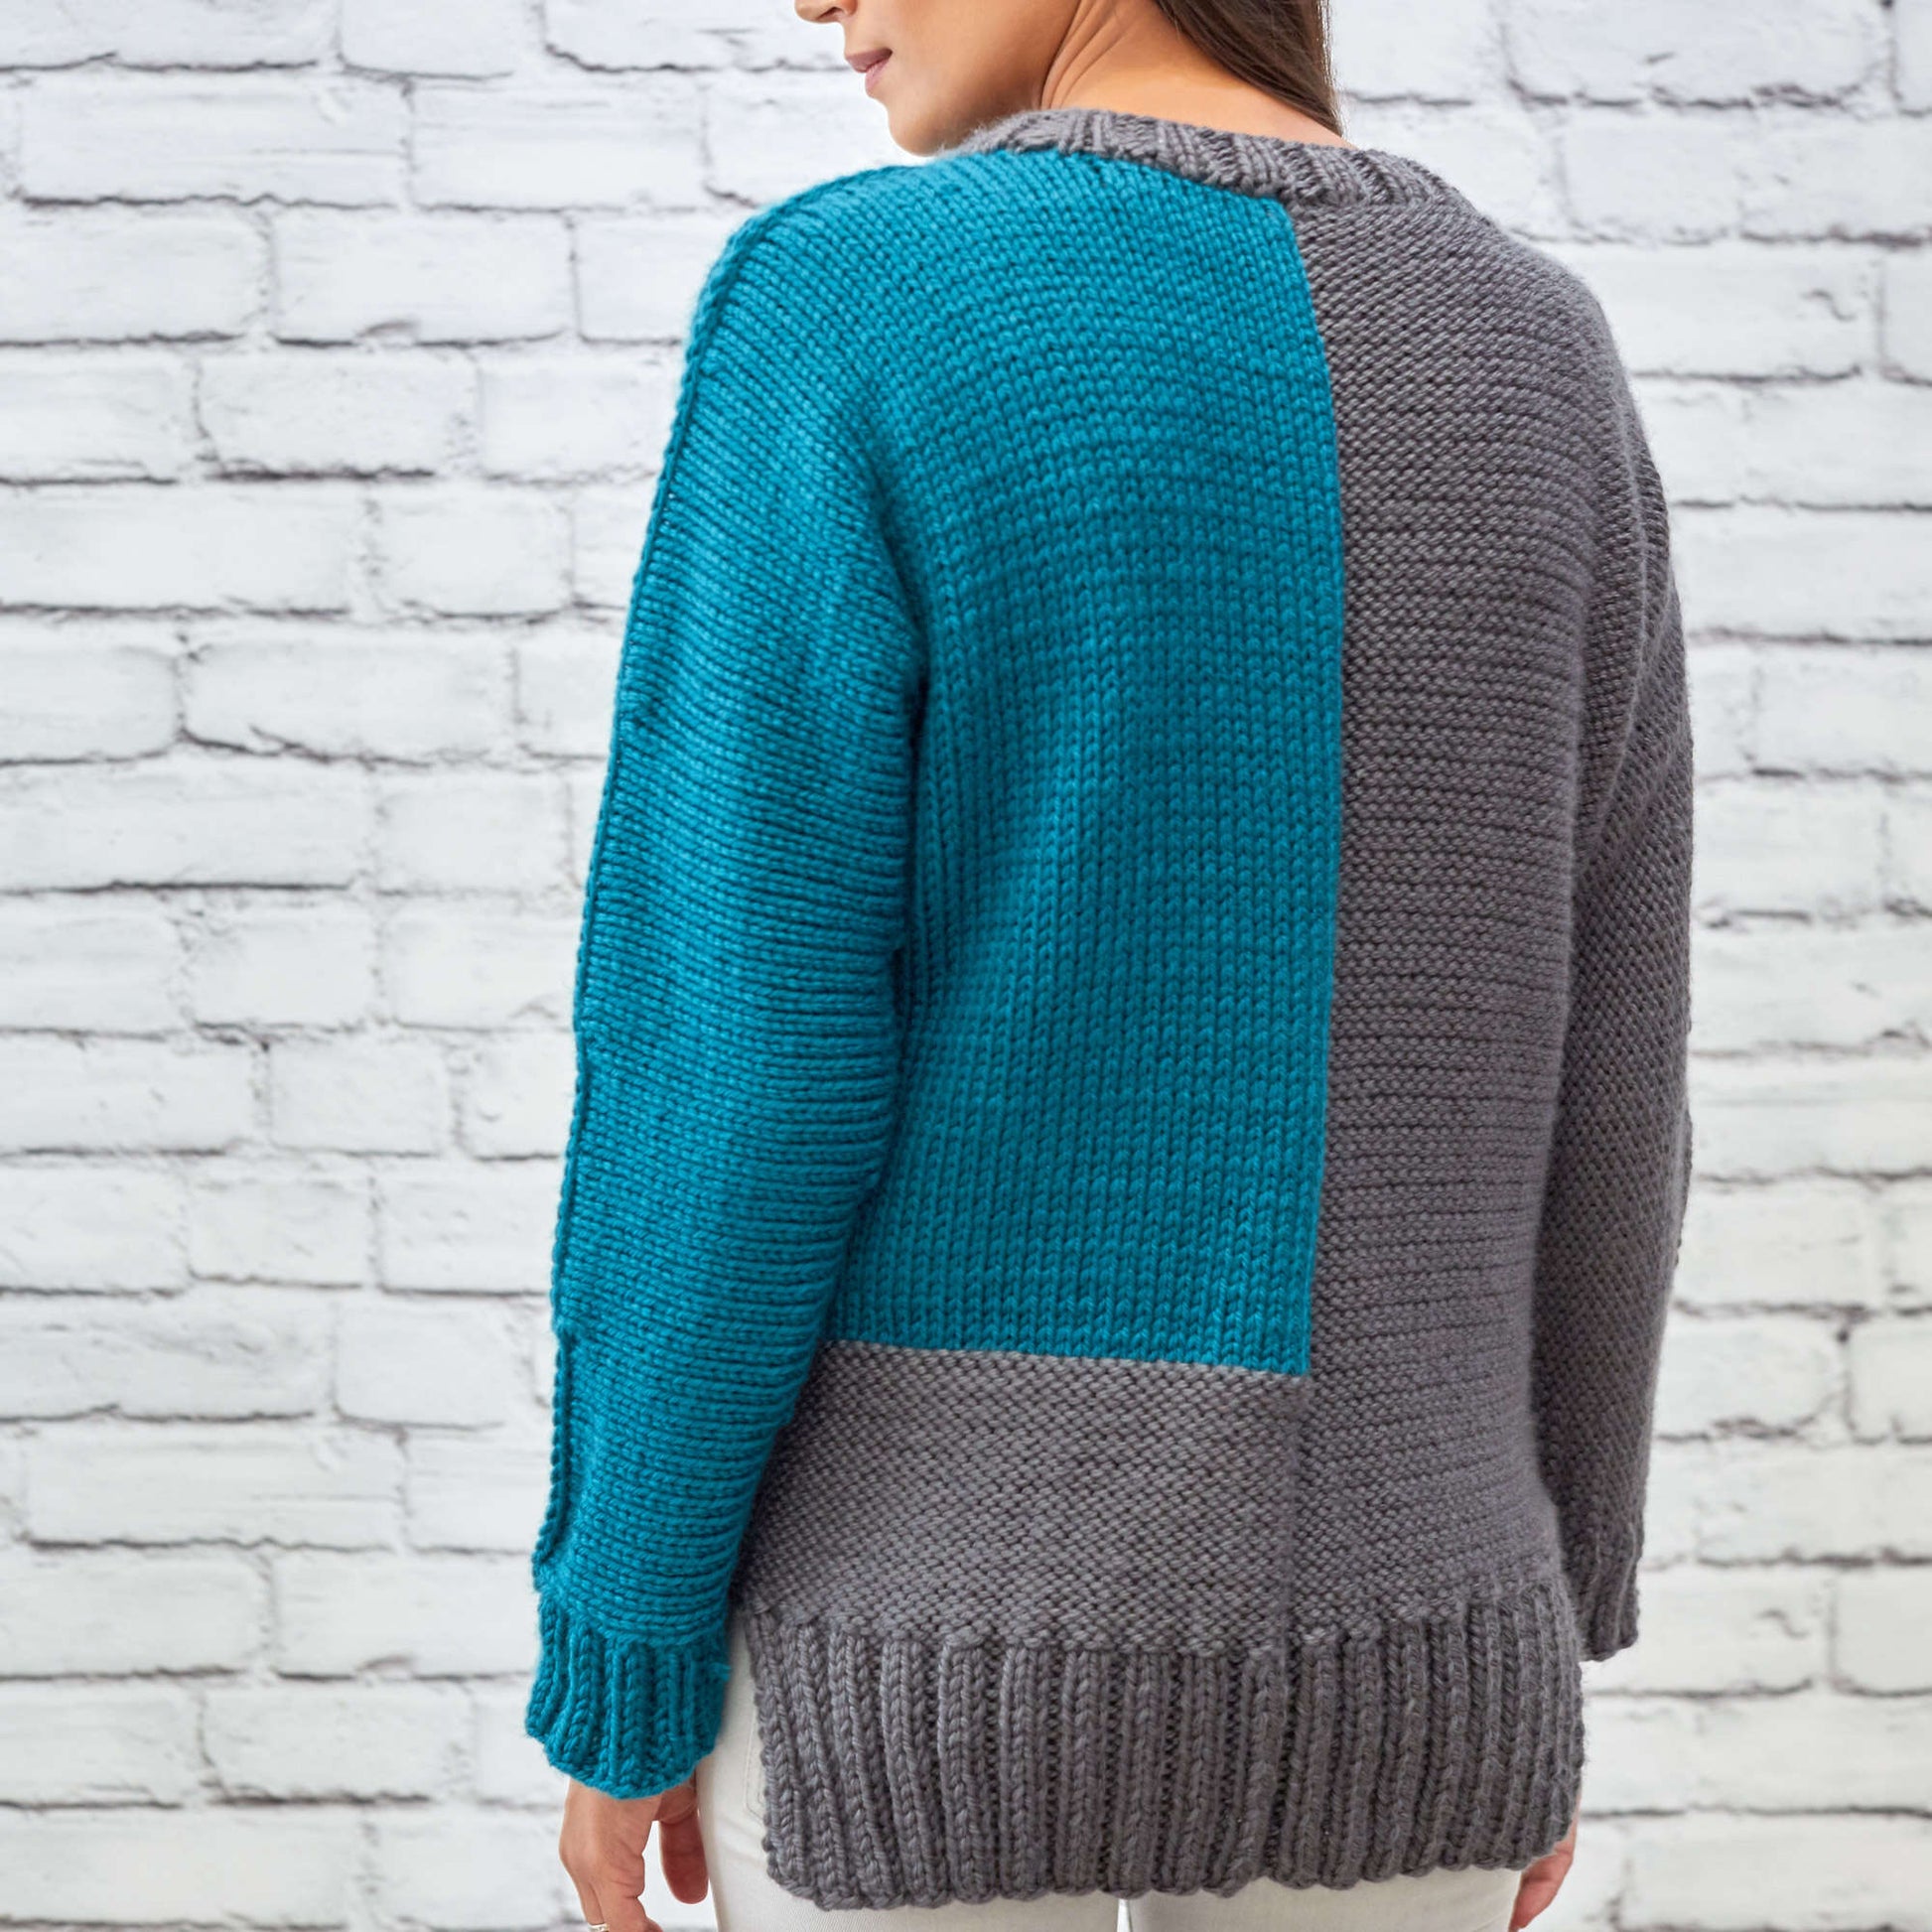 Free Red Heart Contrast Pullover Knit Pattern